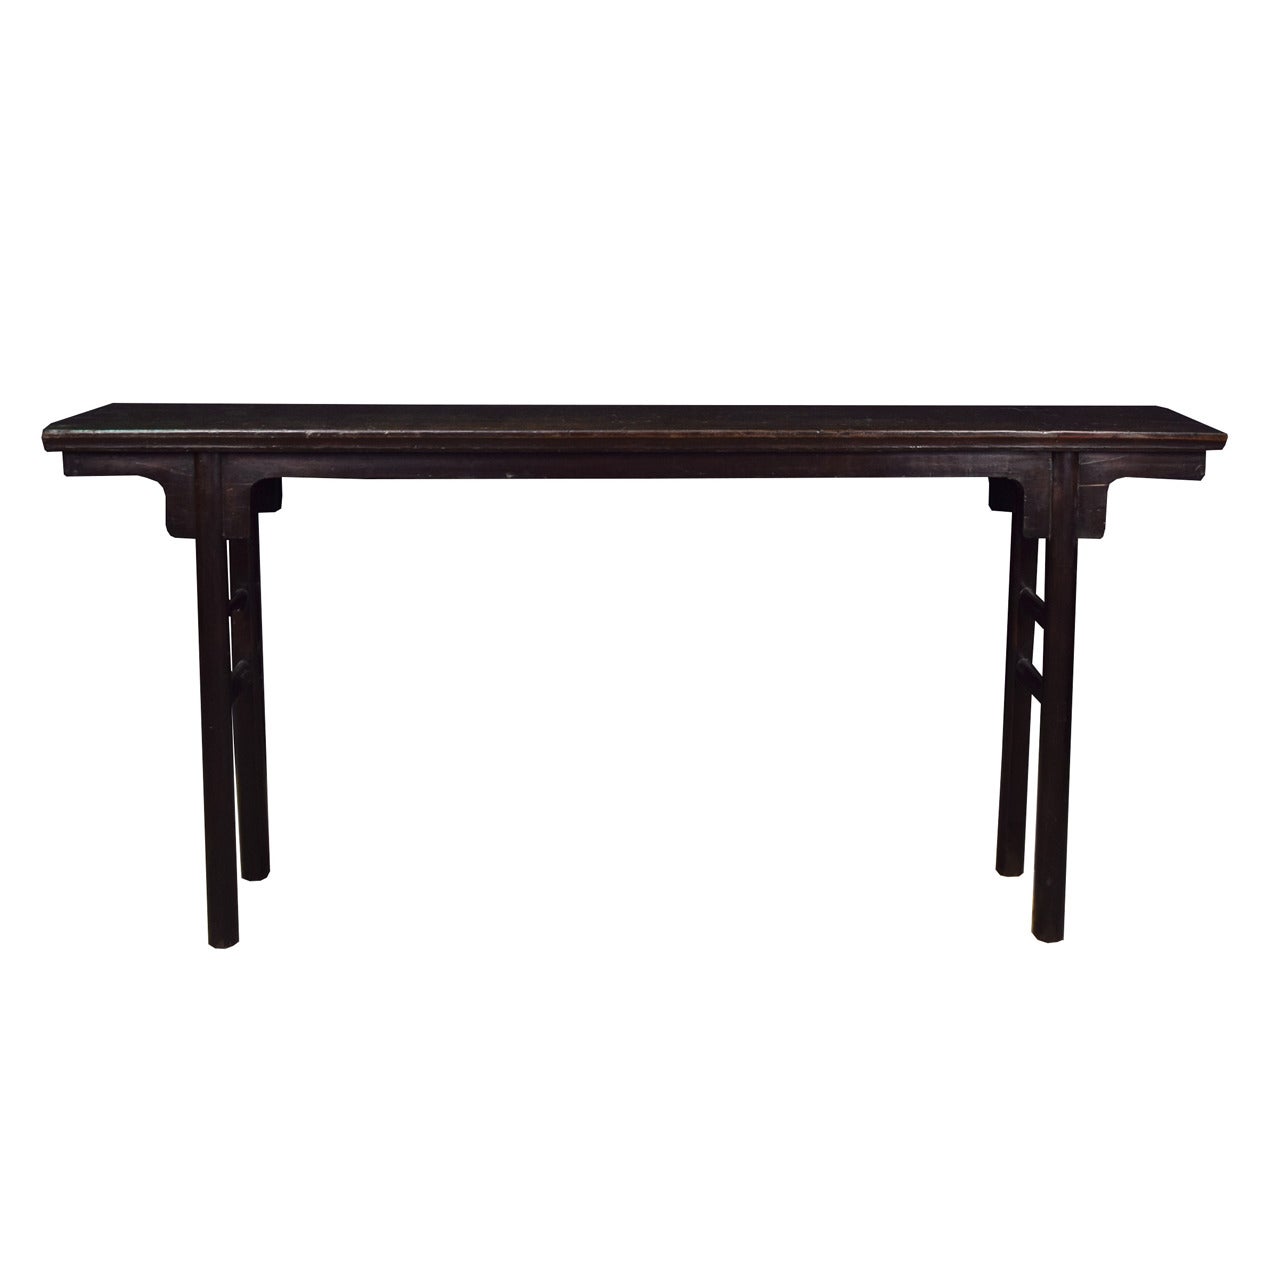 19th Century Chinese Shallow Altar Table with Inset Legs